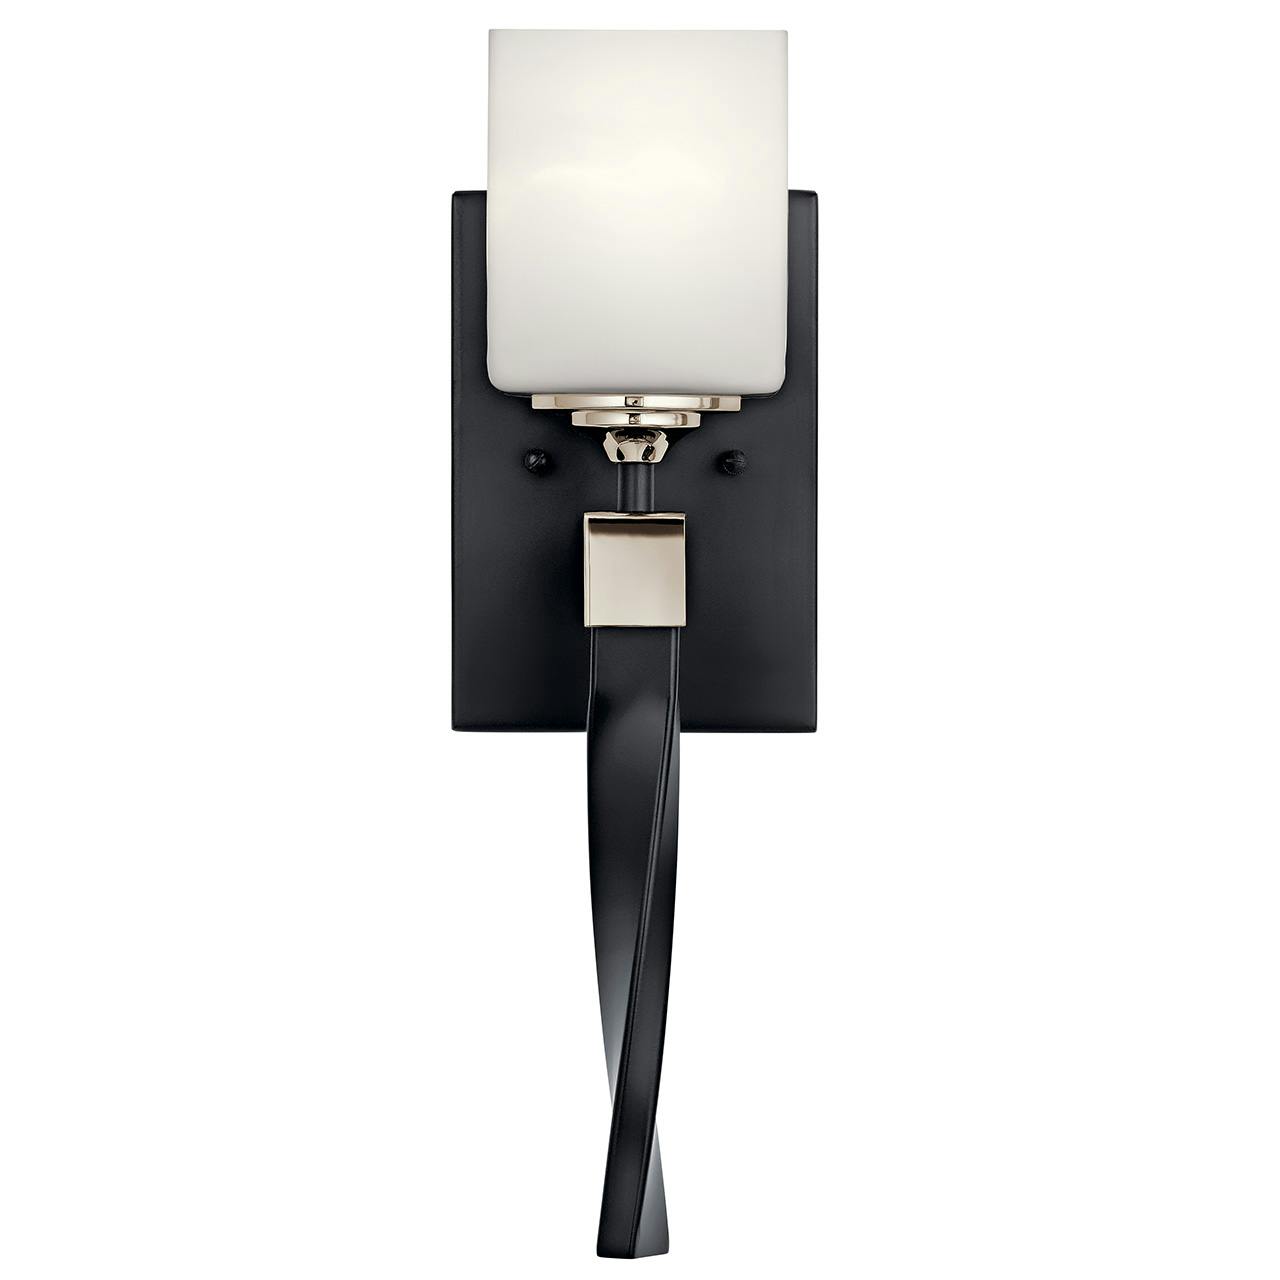 The Marette™ 5" 1 Light Wall Sconce Black facing up on a white background